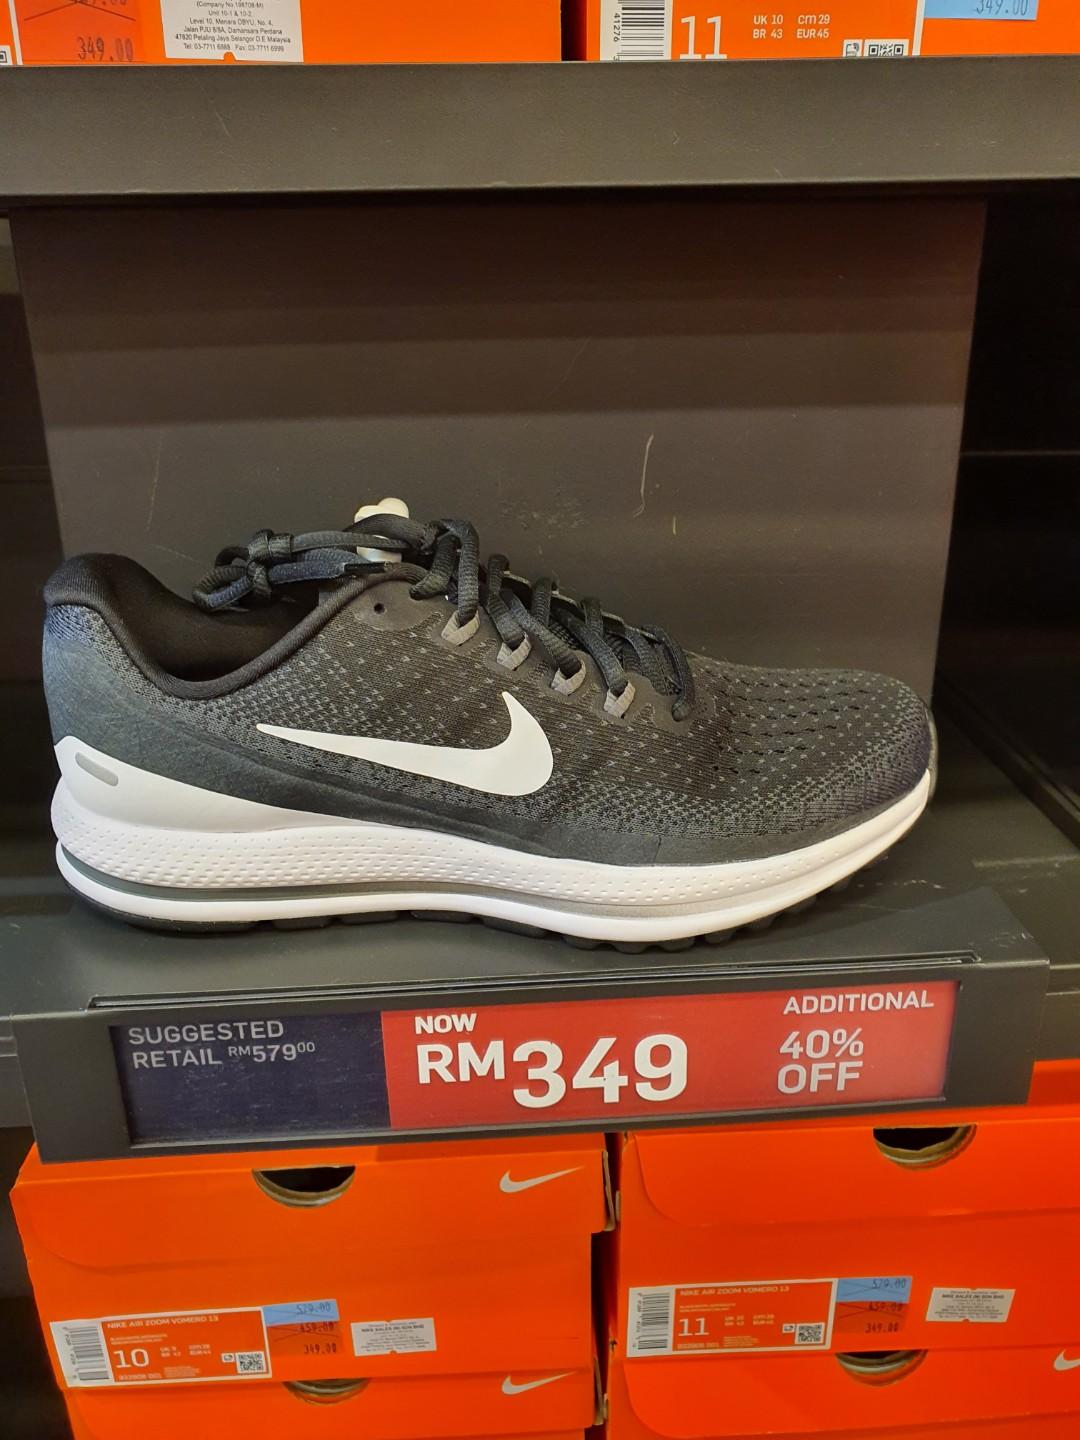 mitsui outlet nike sale